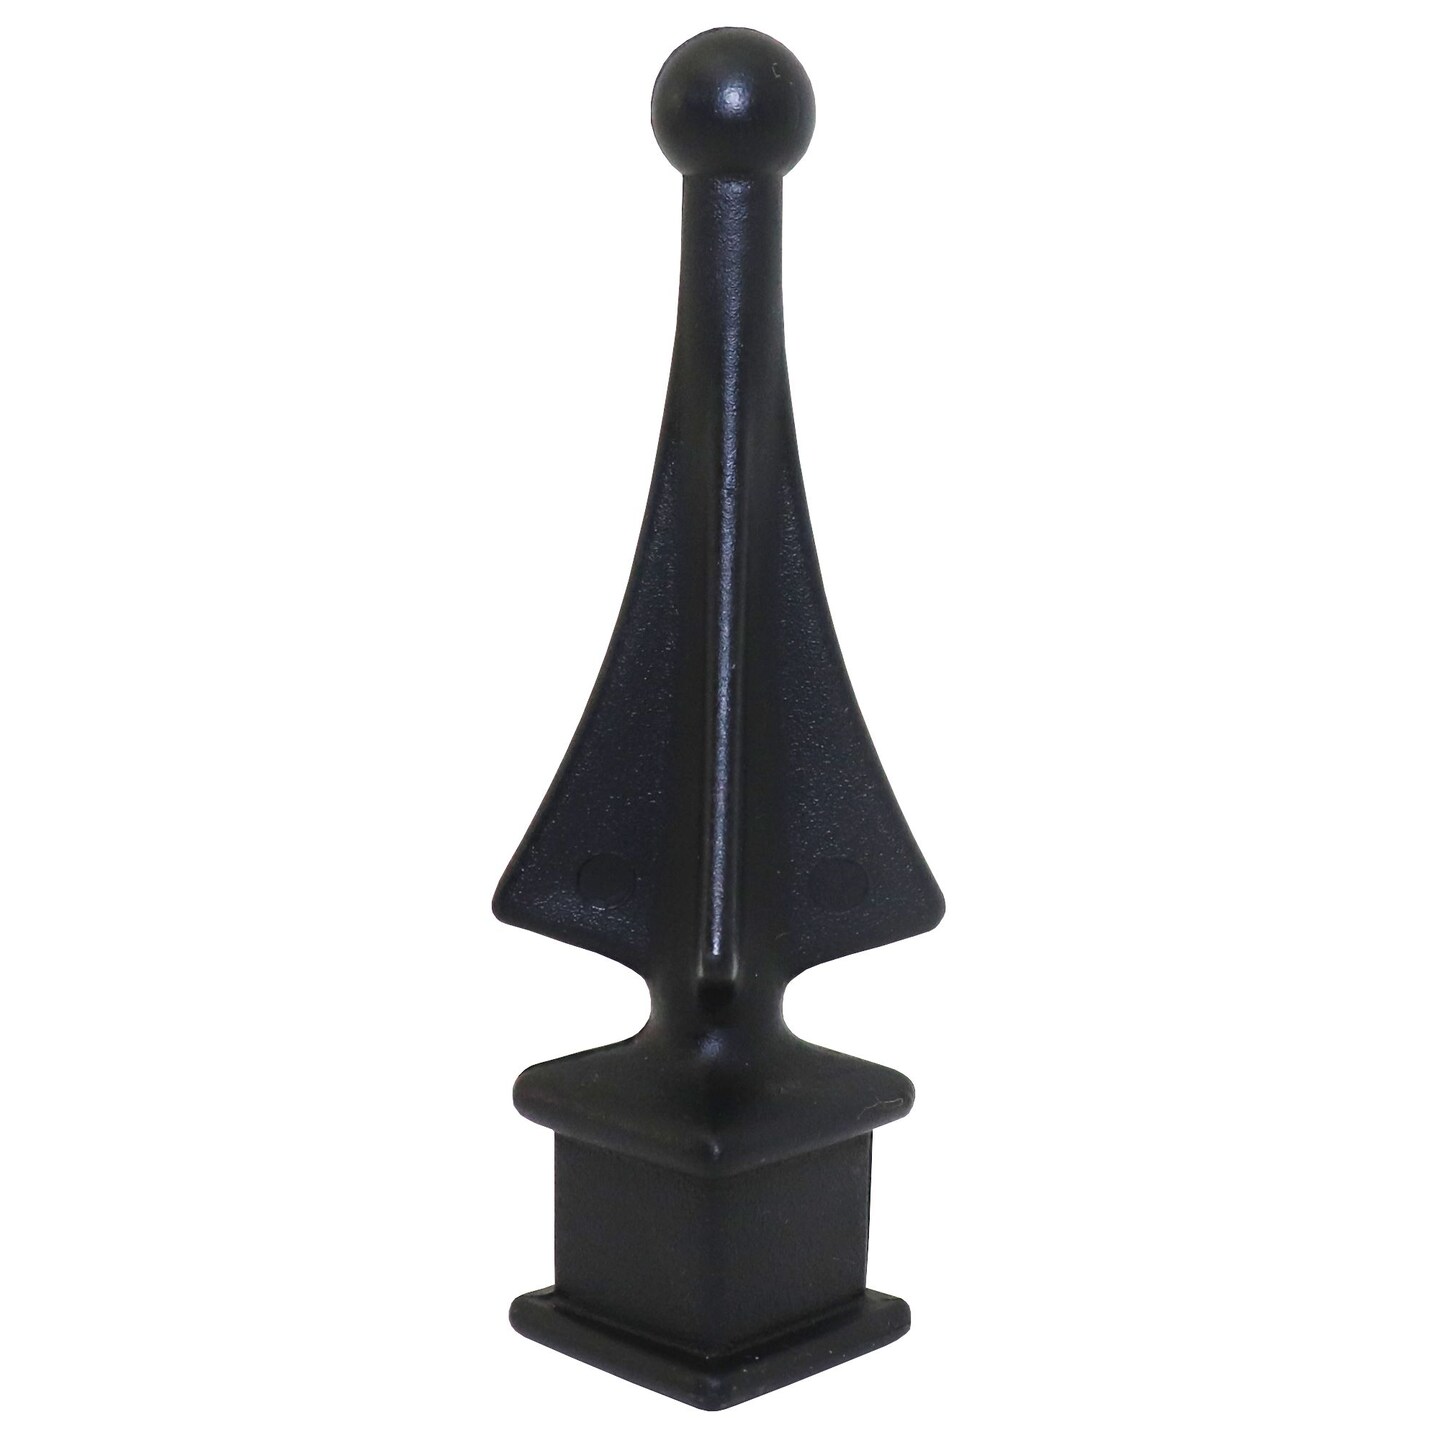 Fence Finials  Four-Sided Spire Polypropylene Decorative Fence Toppers - Black